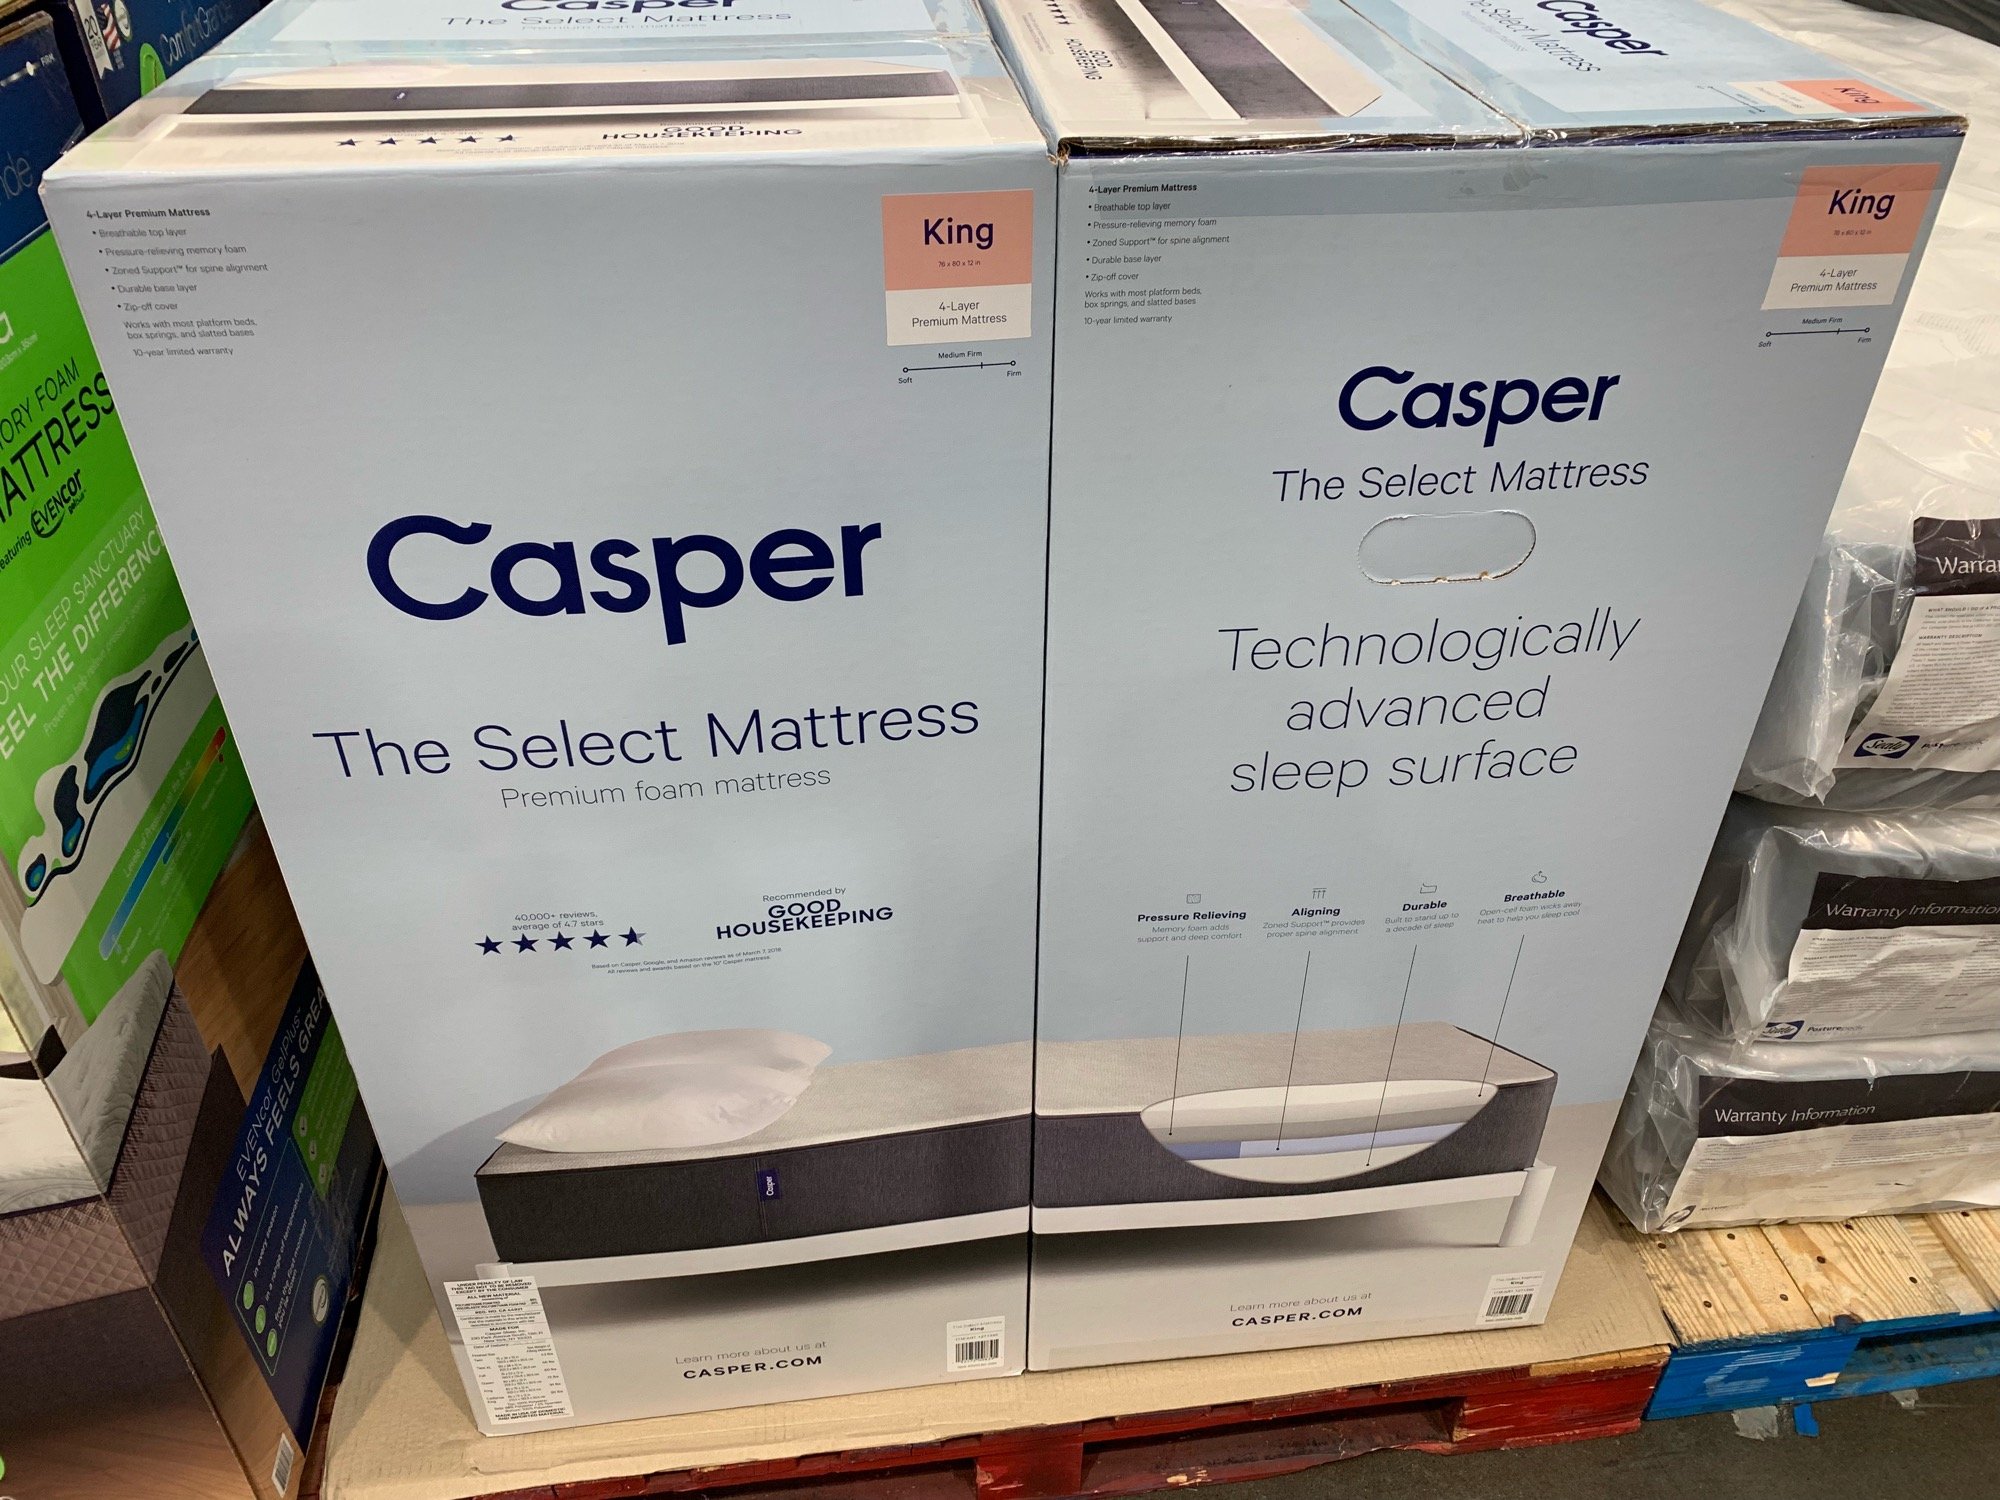 If you are planning on buying The Casper, you should buy it at Costco ...